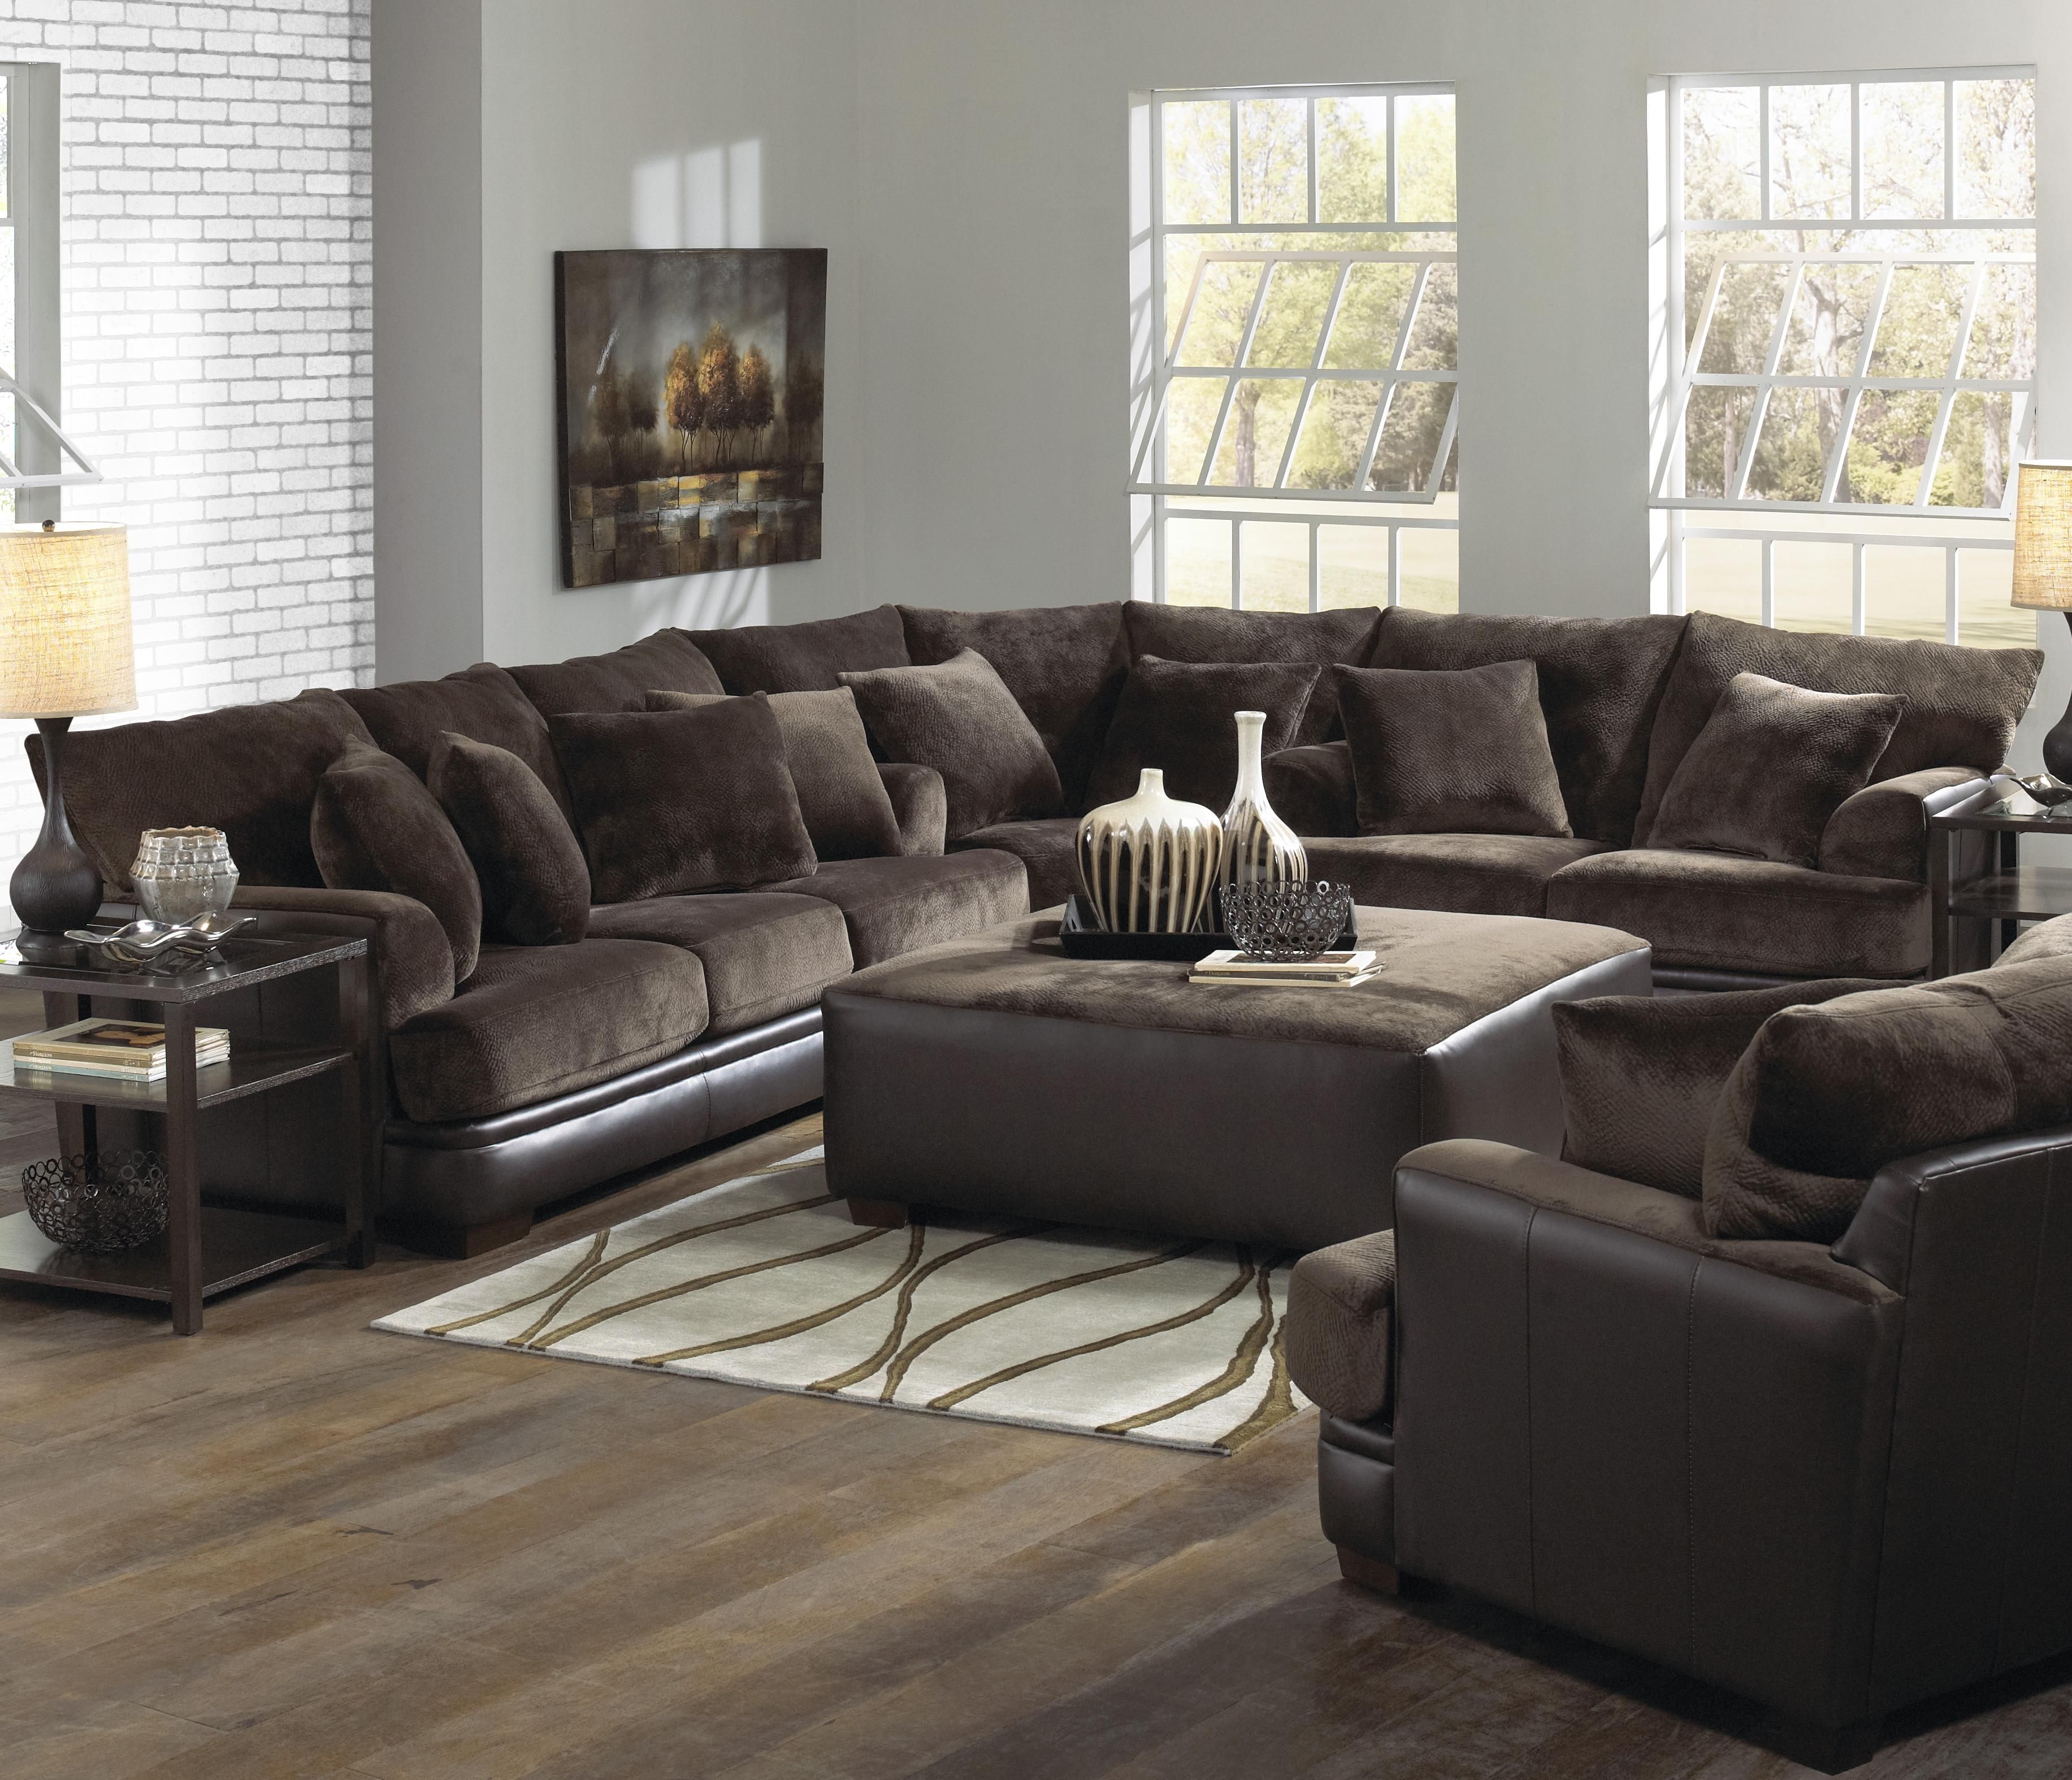 Barkley Large L Shaped Sectional Sofa With Right Side Loveseat Regarding Cozy Sectional Sofas (View 1 of 15)